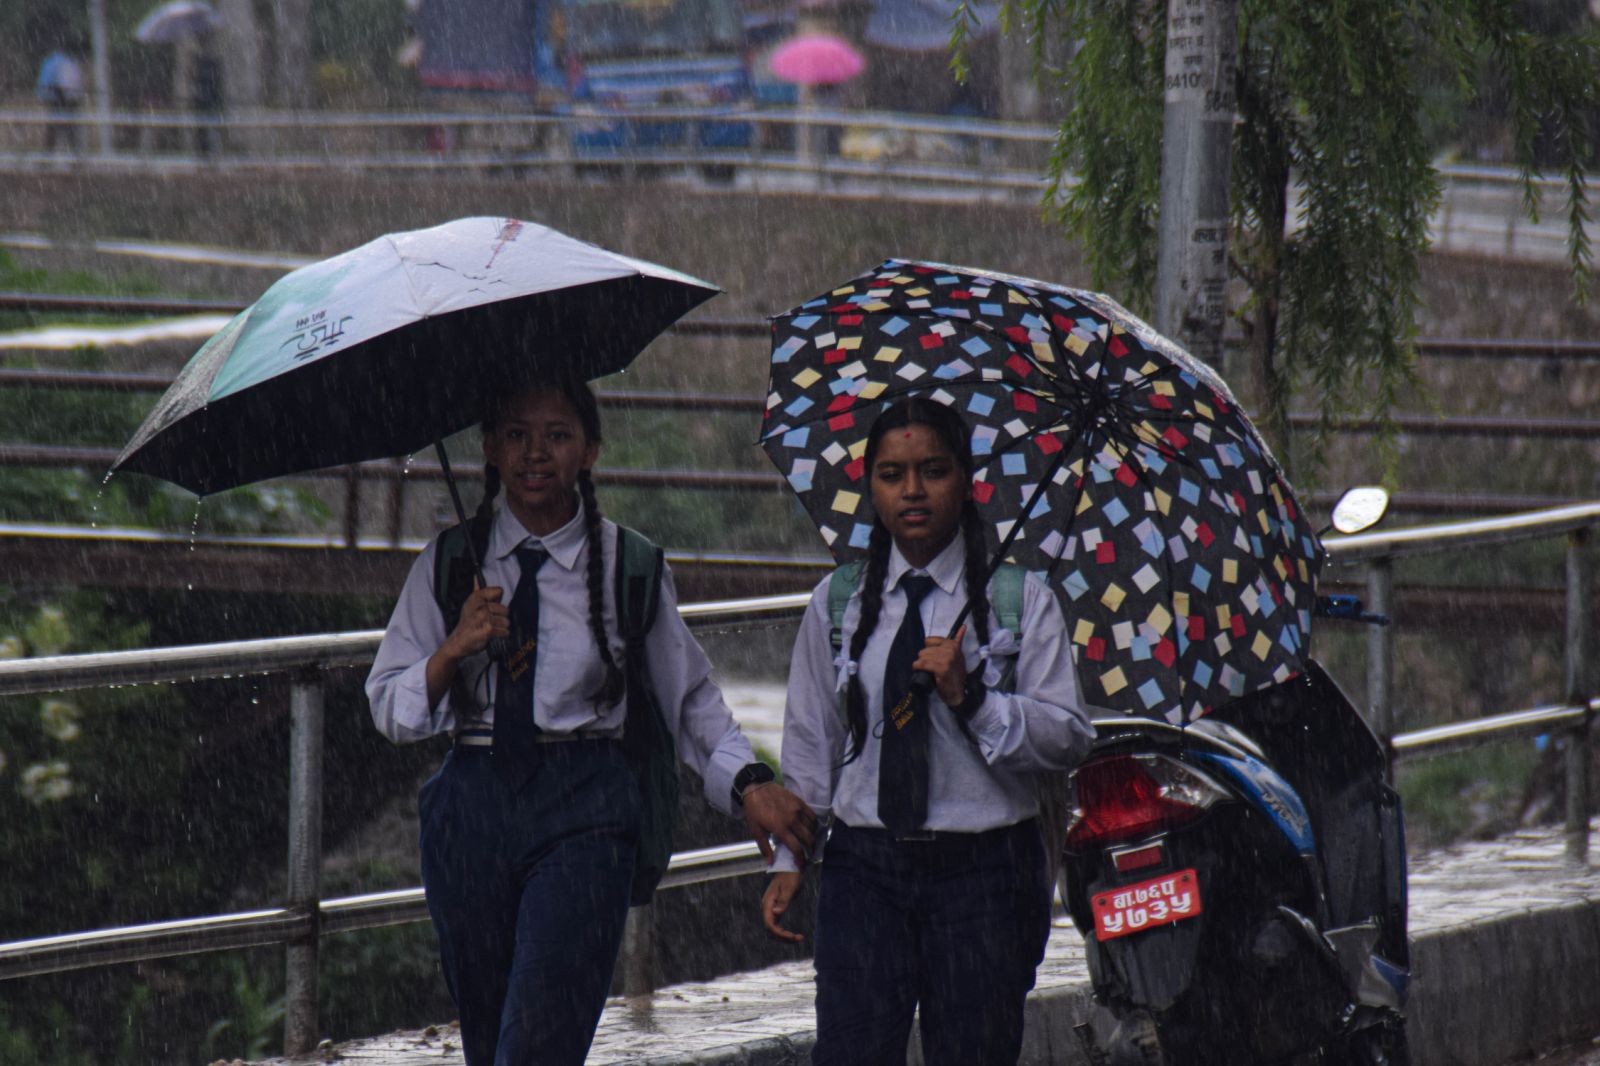 All parts of the country experience light to moderate rainfall rainfall since morning